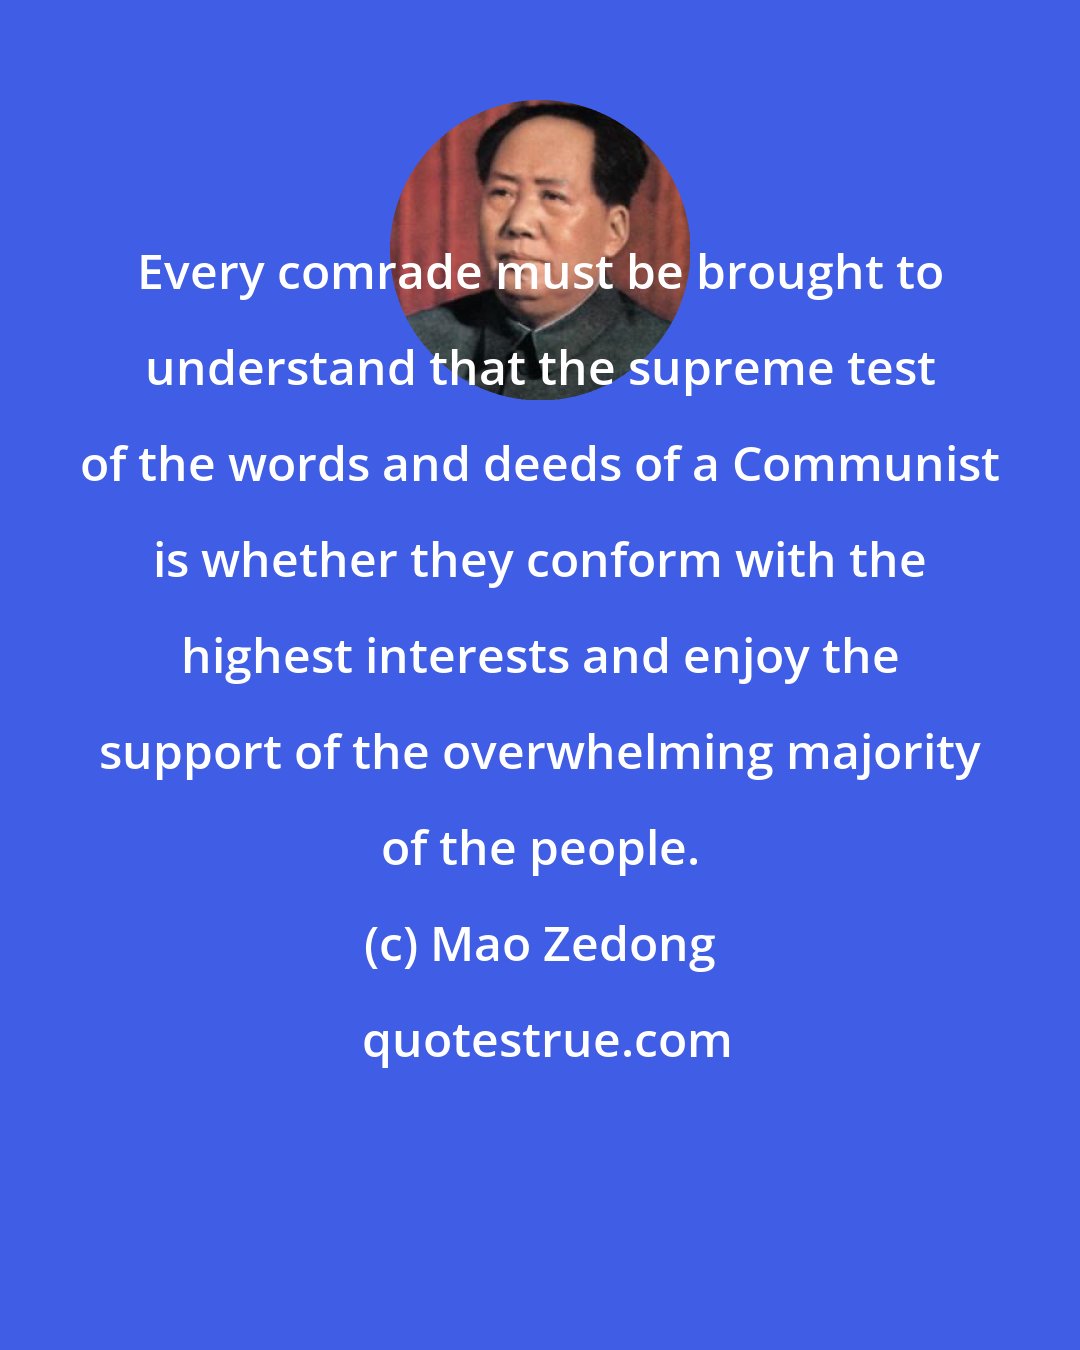 Mao Zedong: Every comrade must be brought to understand that the supreme test of the words and deeds of a Communist is whether they conform with the highest interests and enjoy the support of the overwhelming majority of the people.